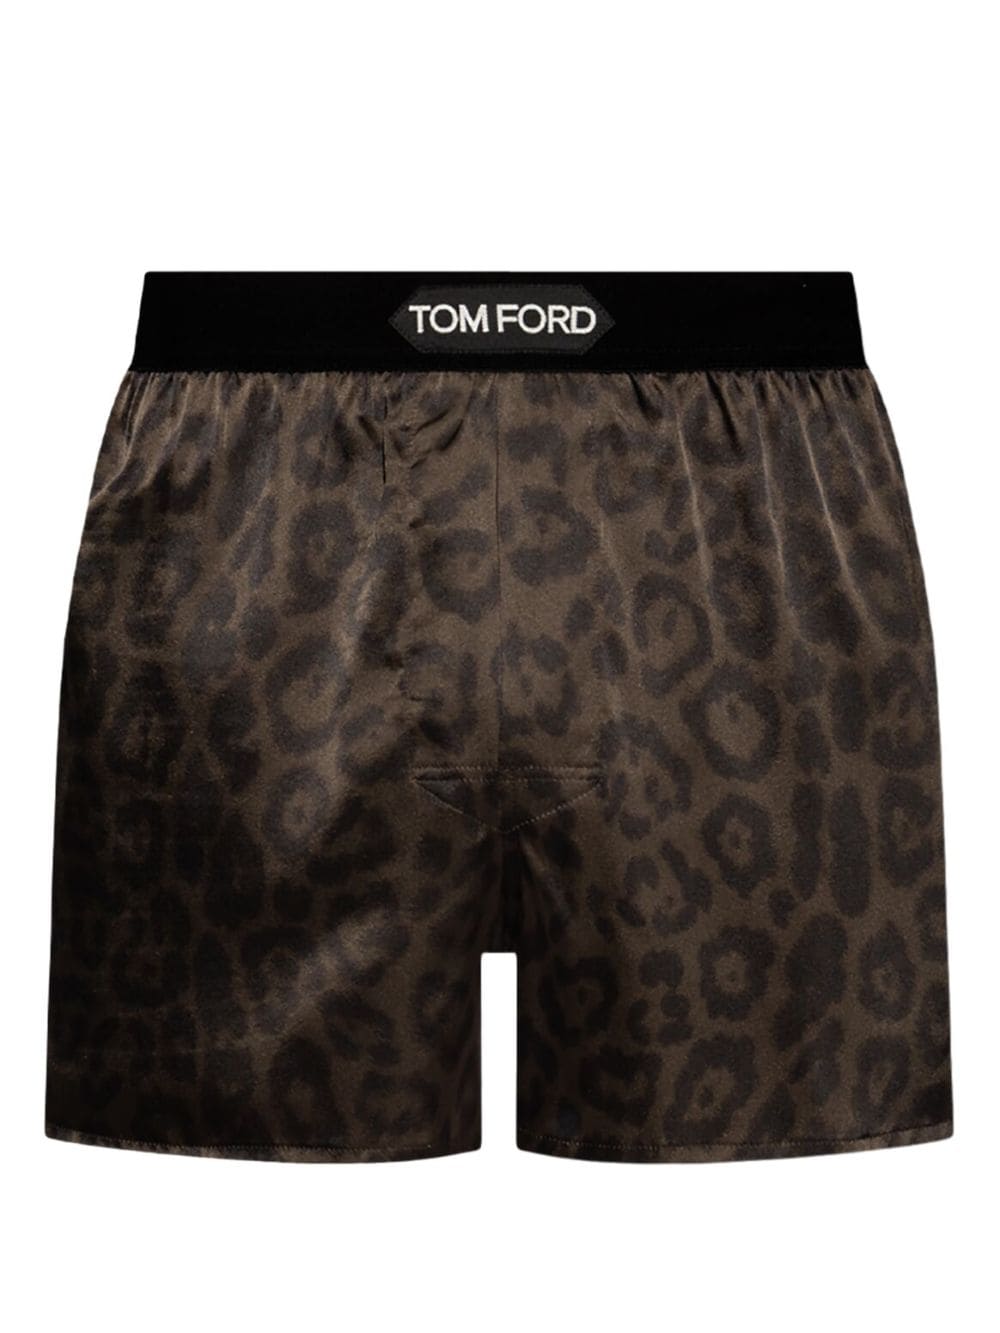 TOM FORD leopard-print logo-waistband boxers - Brown von TOM FORD